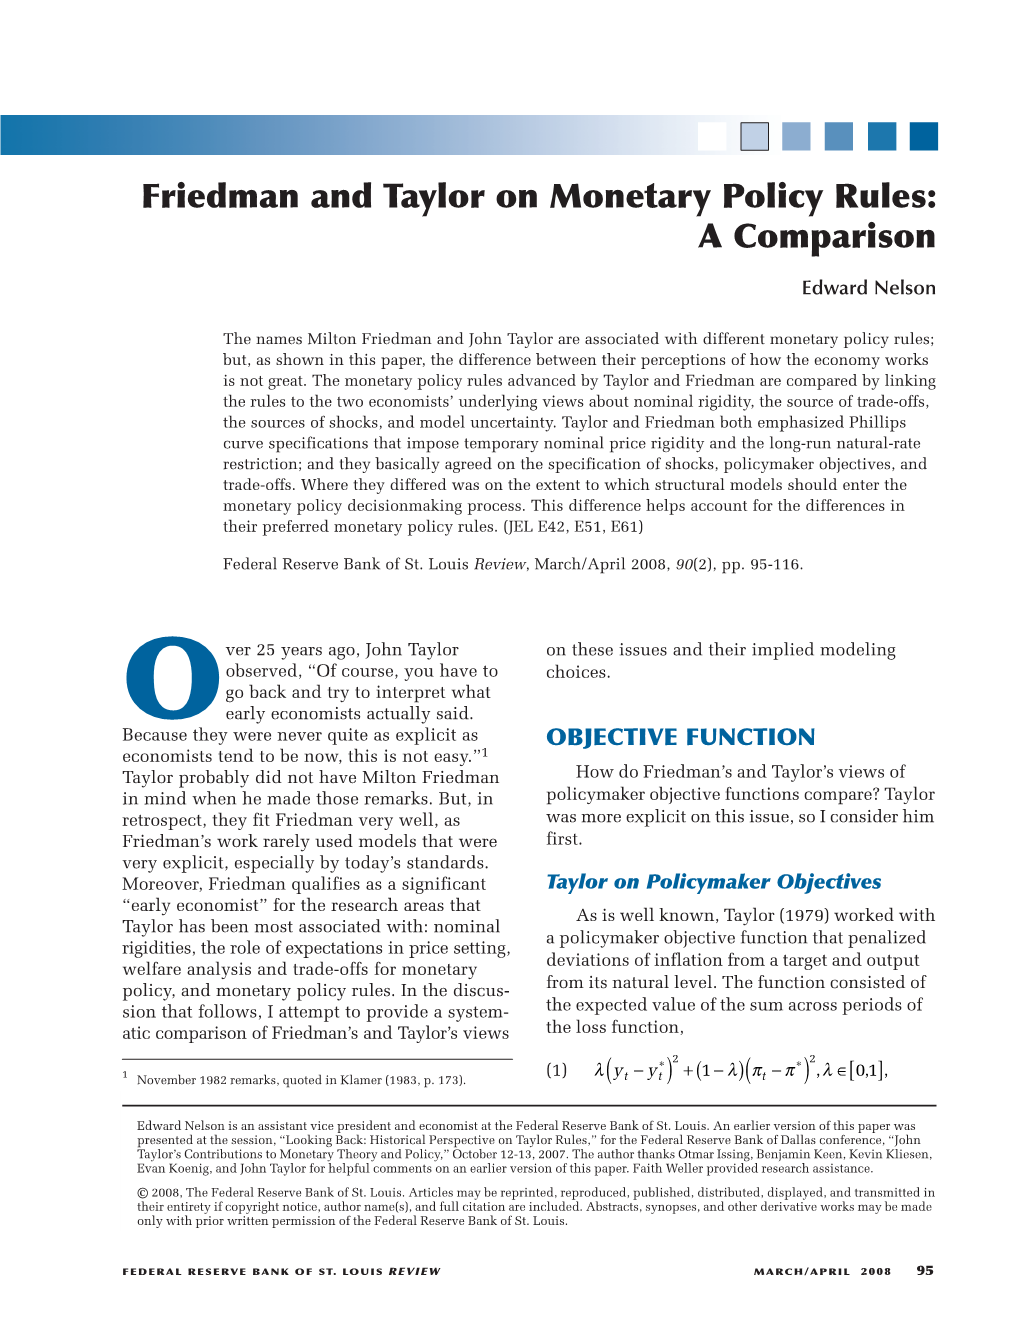 Friedman and Taylor on Monetary Policy Rules: a Comparison